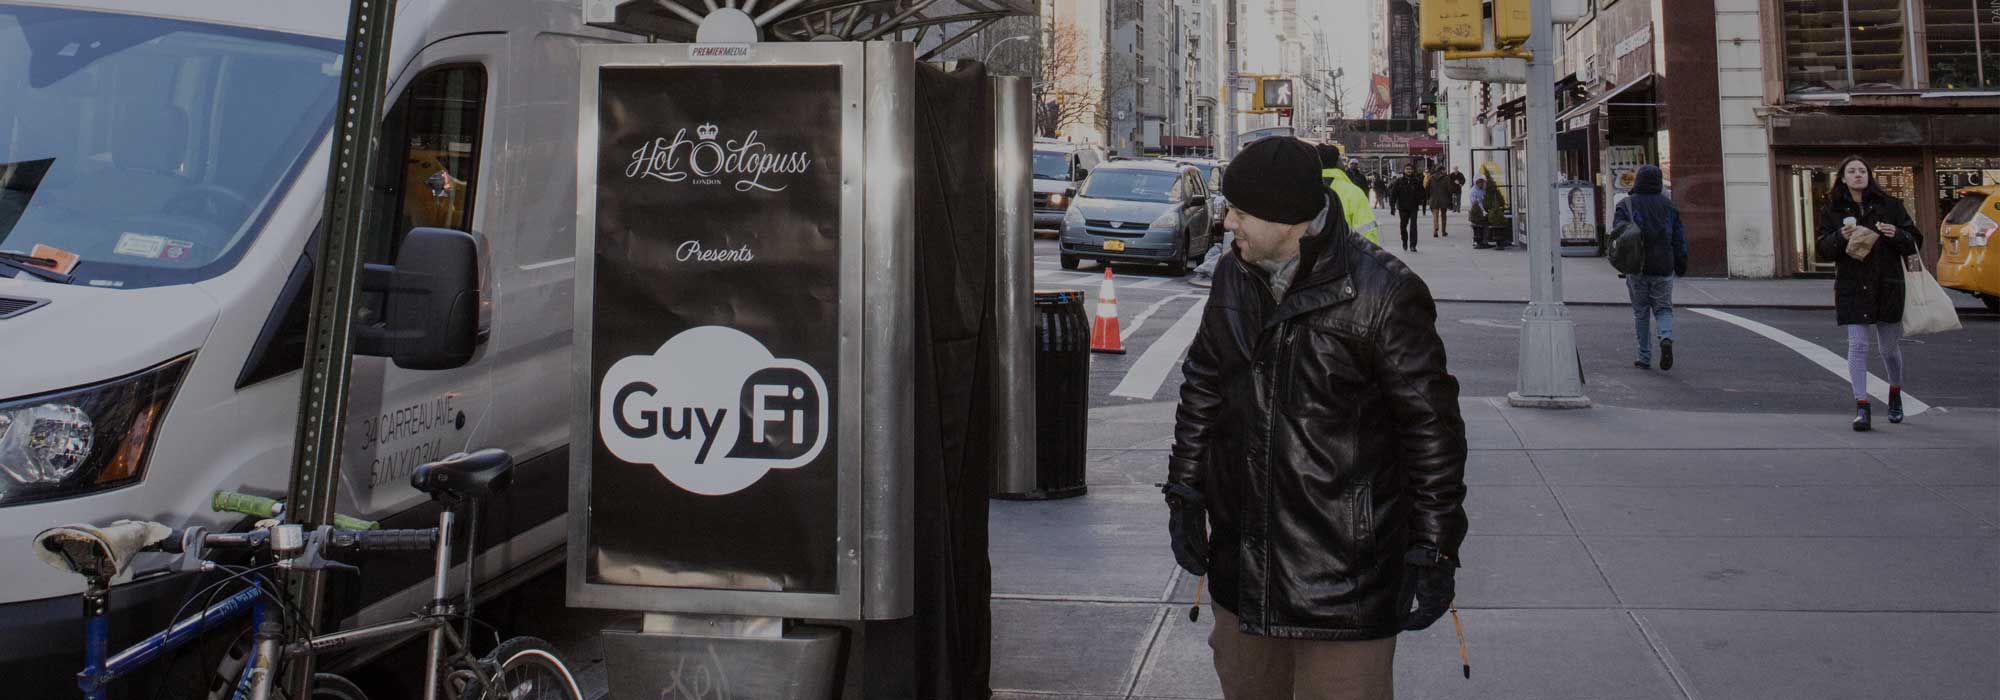 ‘GuyFi’ booth brings relief to overworked NYC men